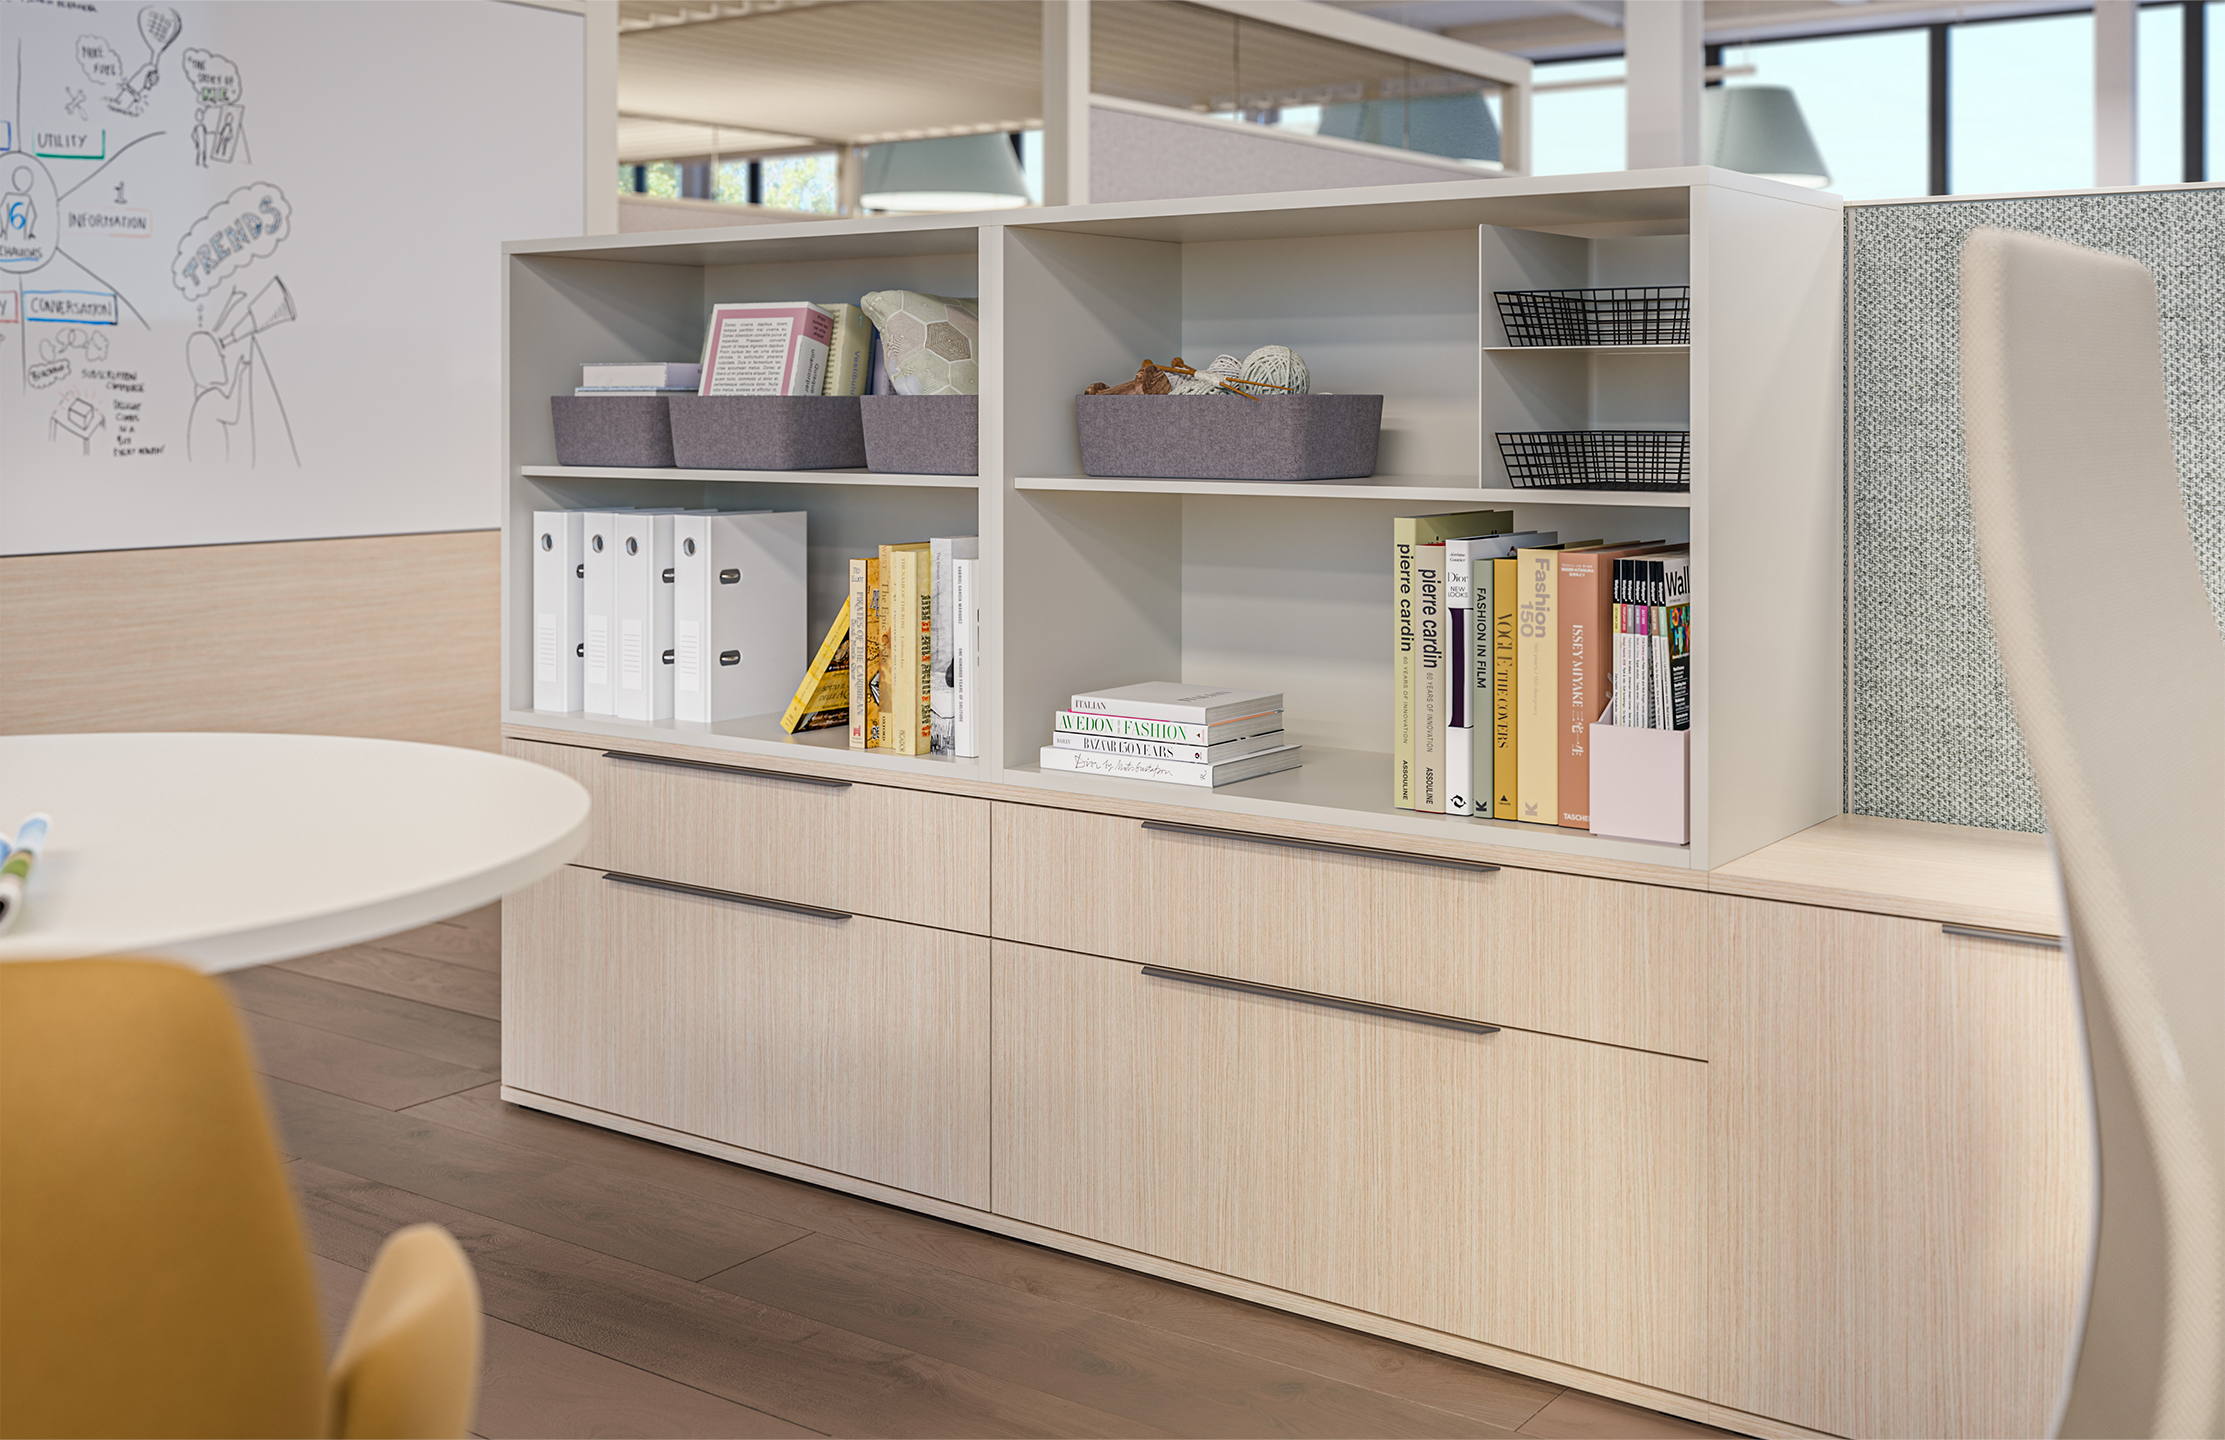 Be_Hold Be lateral files and stacking bookcases in light woodgrain finish